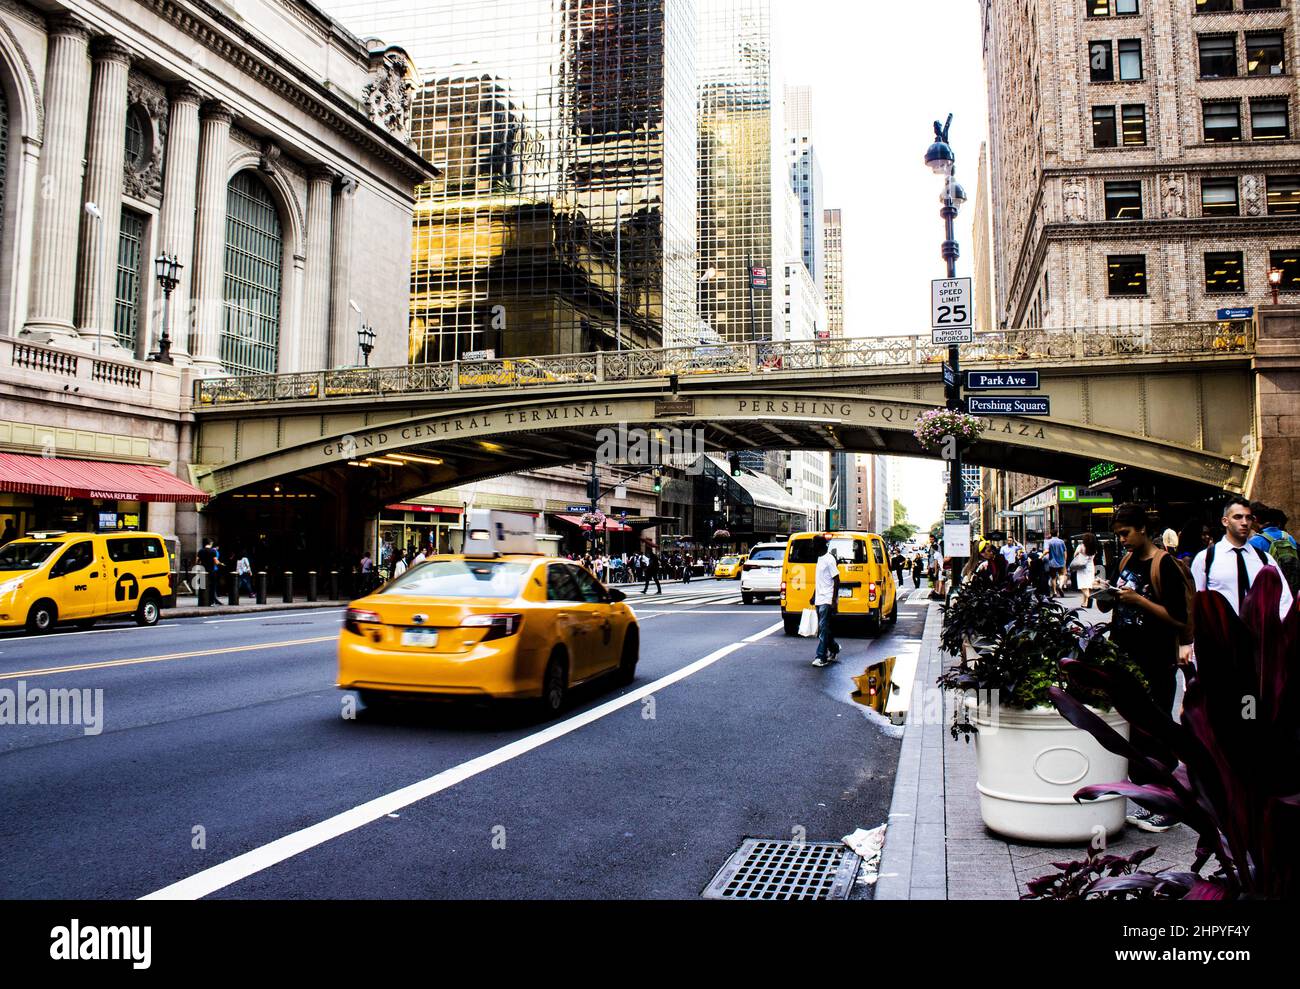 Grand central terminal. The most famous station in new york. Take the train to new york. Travel to new york Grand central station NYC. yellow taxi. Stock Photo